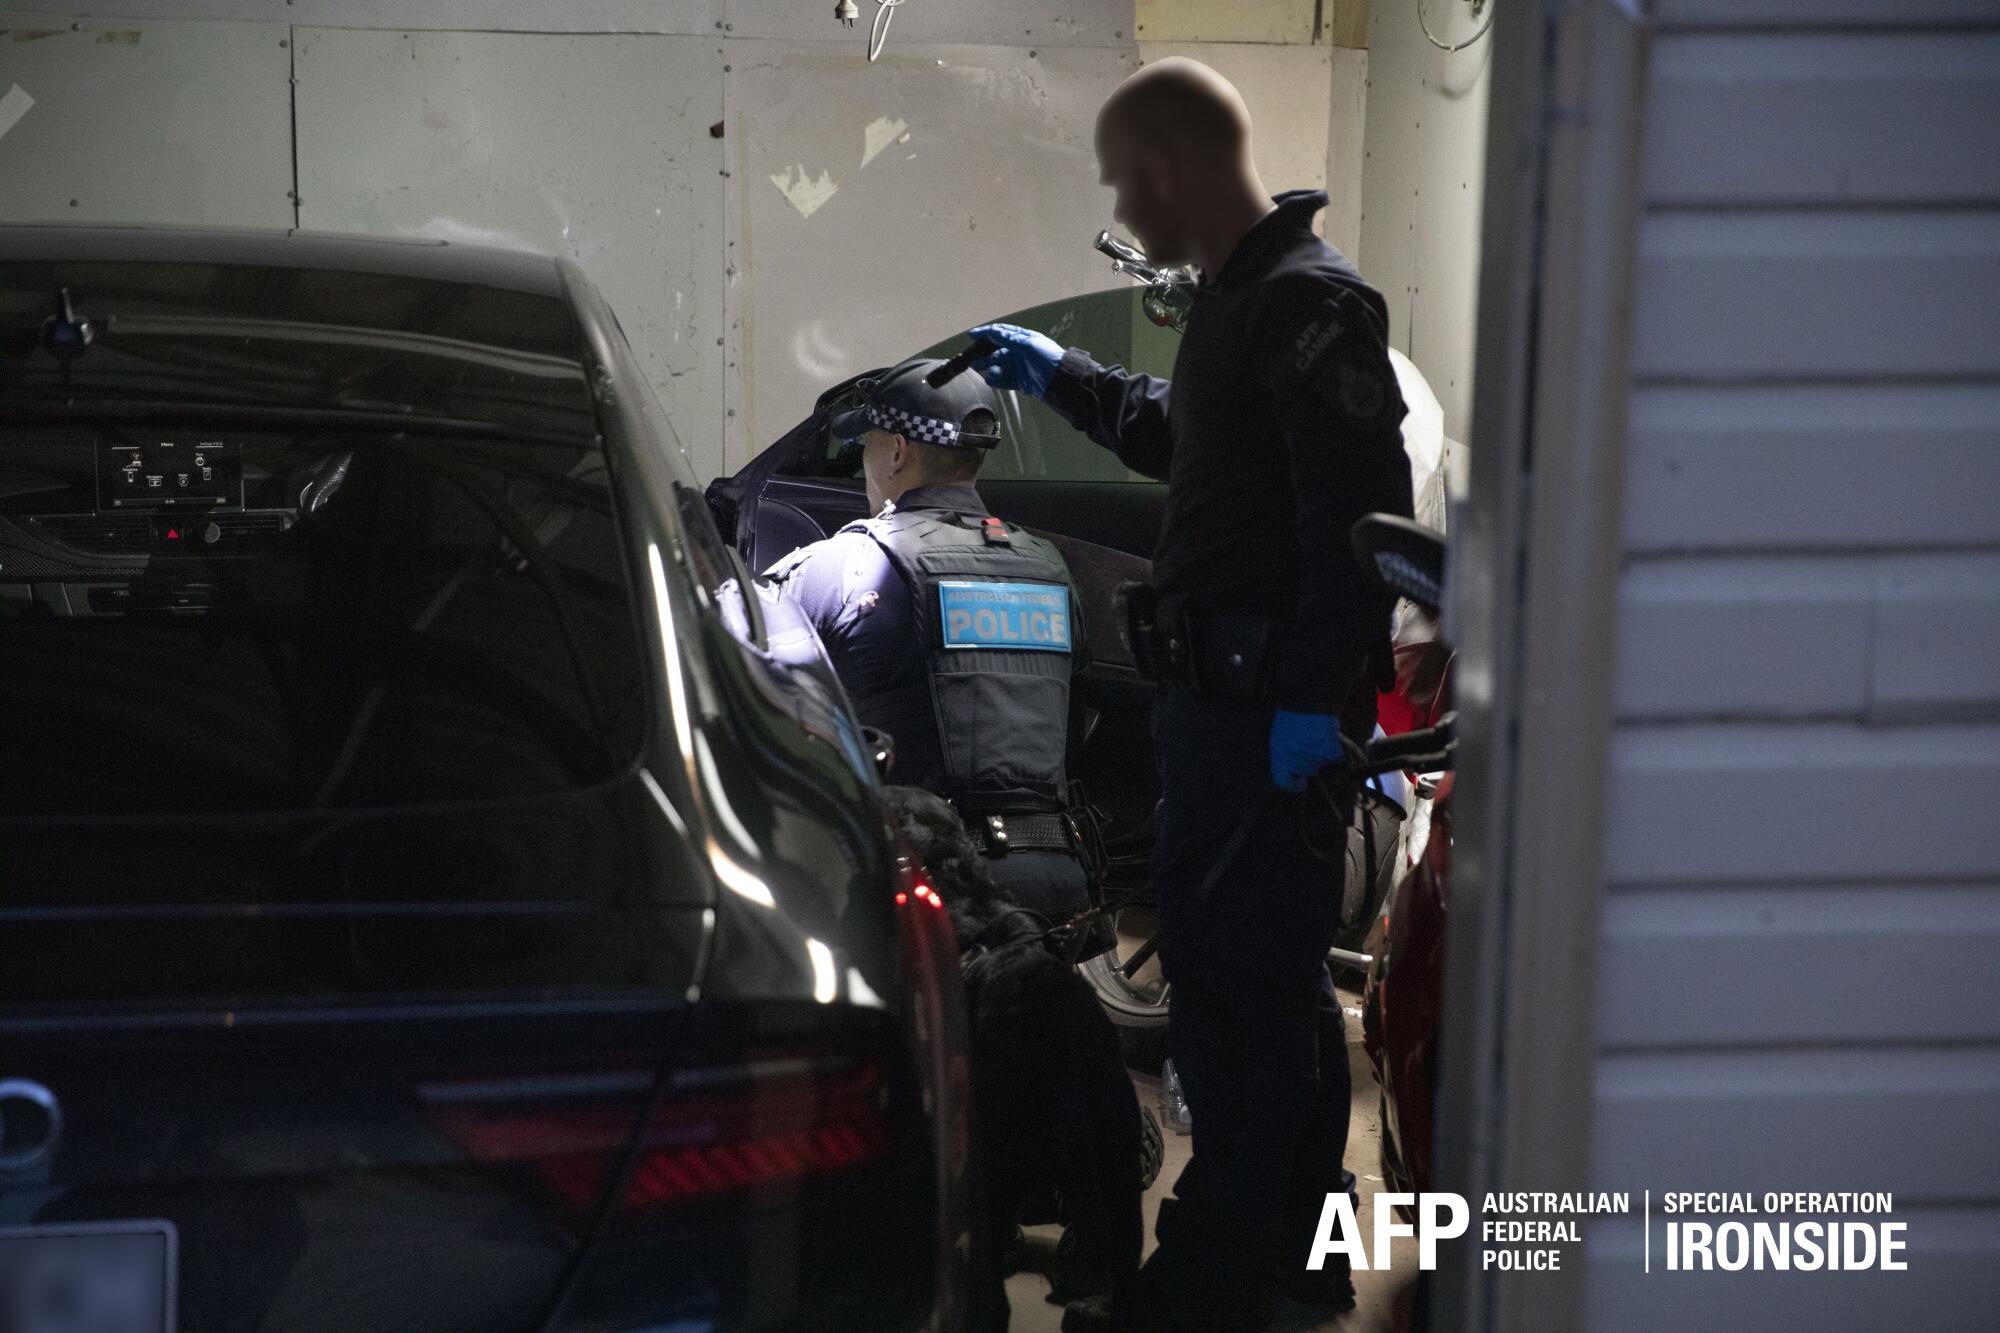 Law enforcement in Australia search a car as part of the global sting operation.